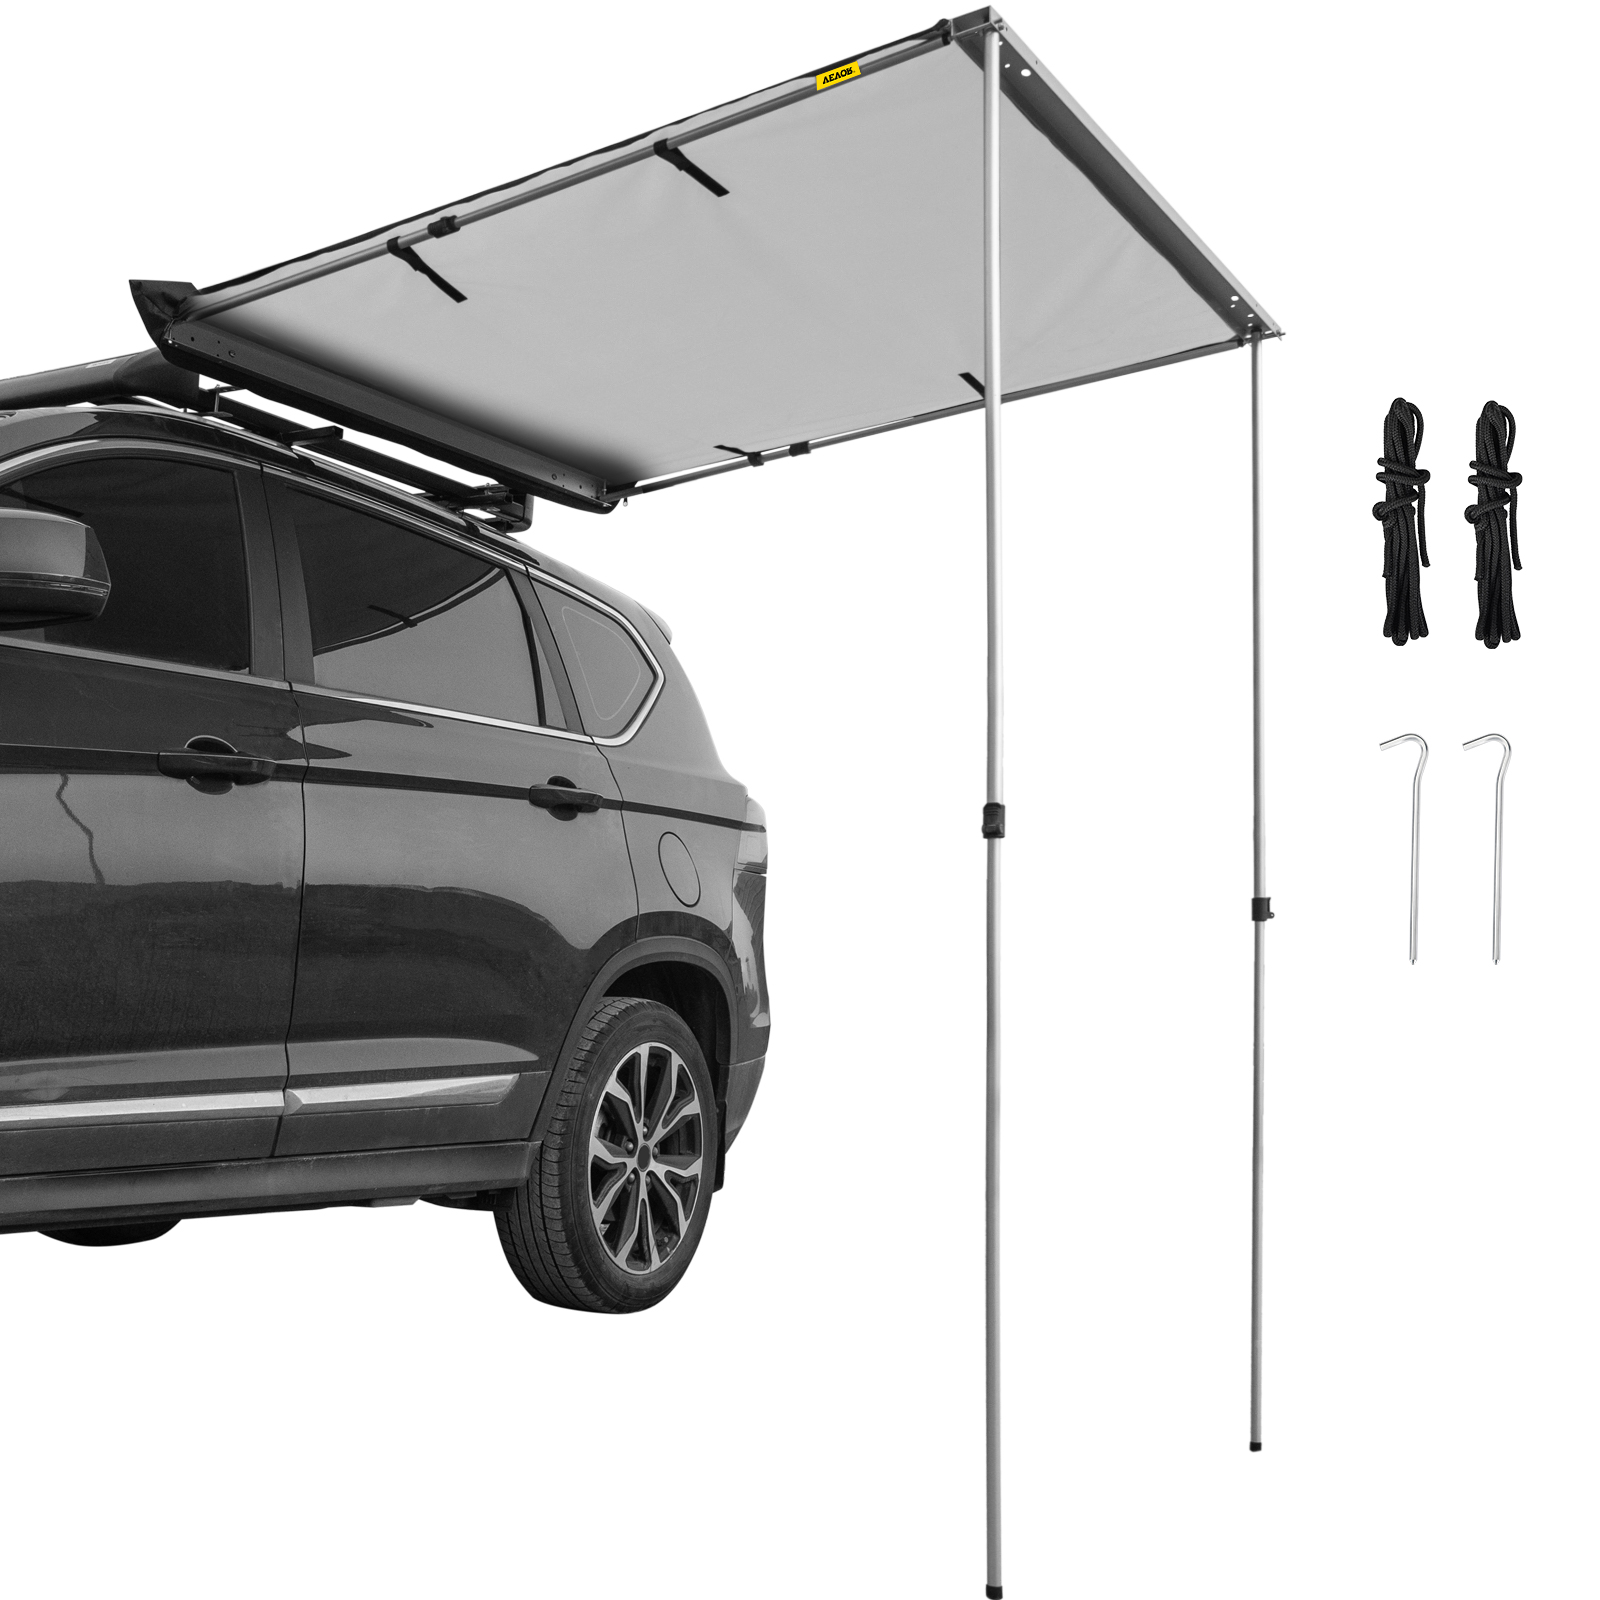 VEVOR Car Awning Car Tent Retractable Waterproof SUV Rooftop Grey 6'x6' от Vevor Many GEOs